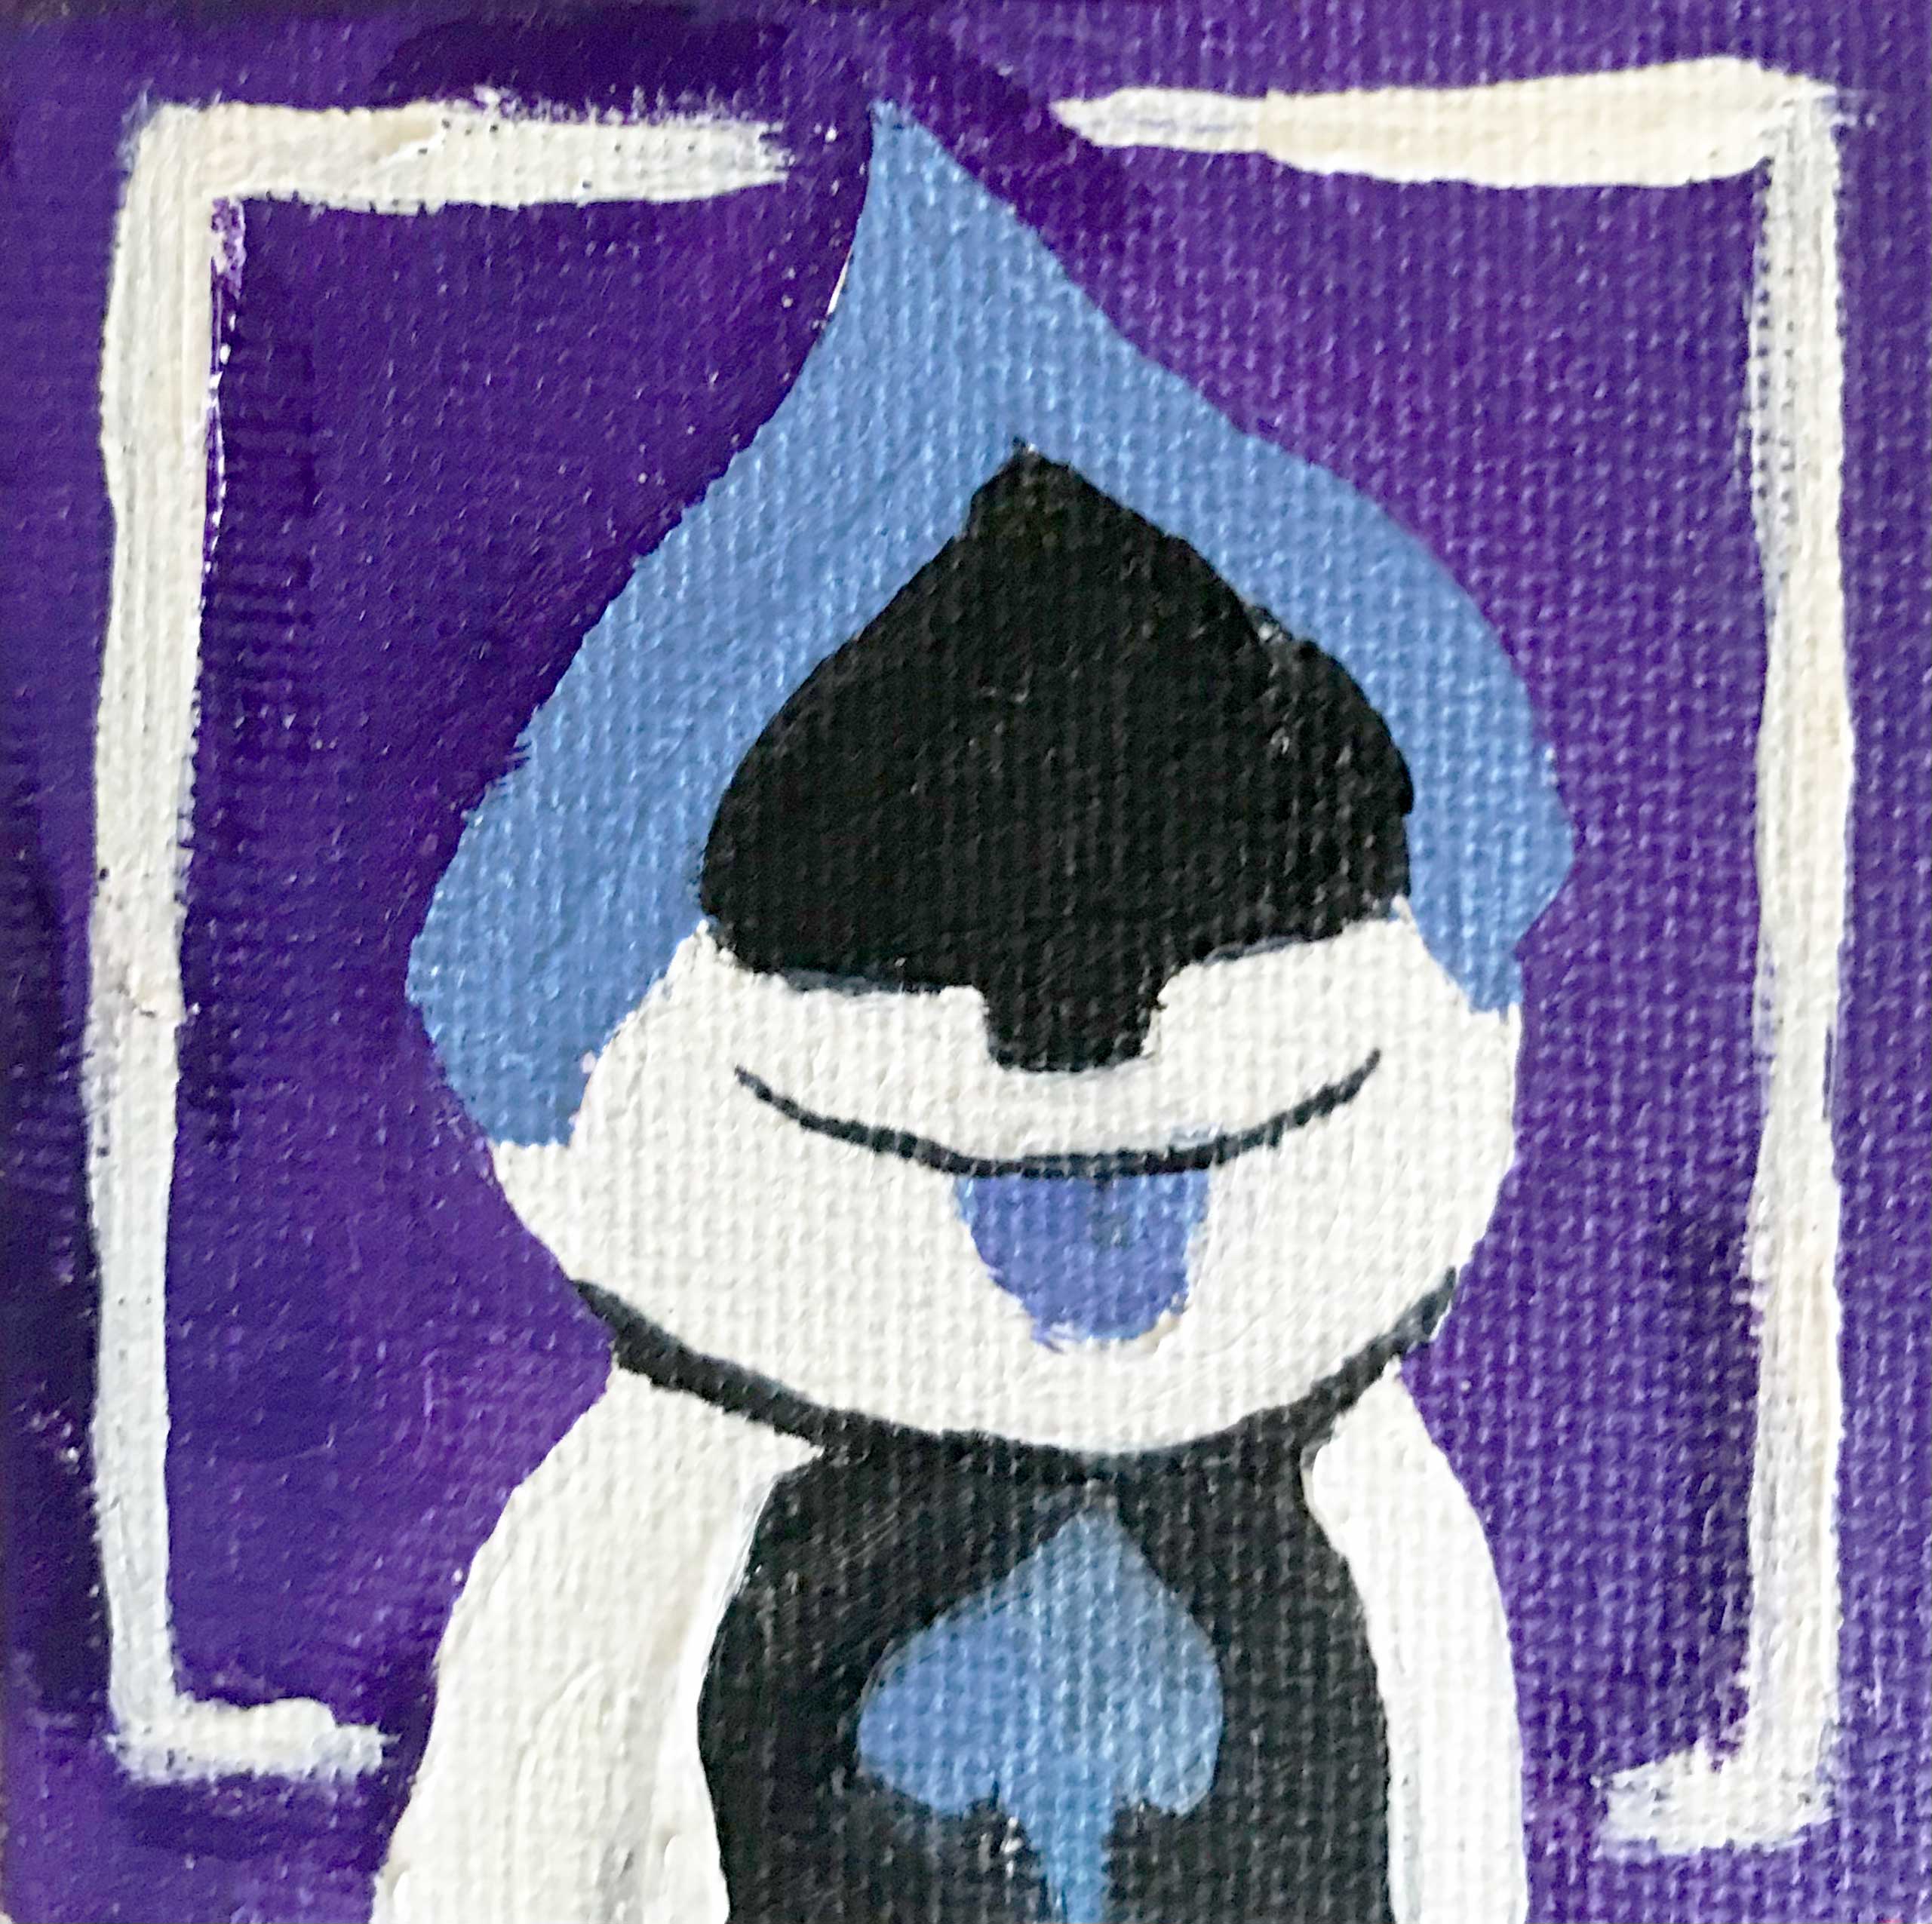 Mini canvas portrait of a deltarune character named lancer